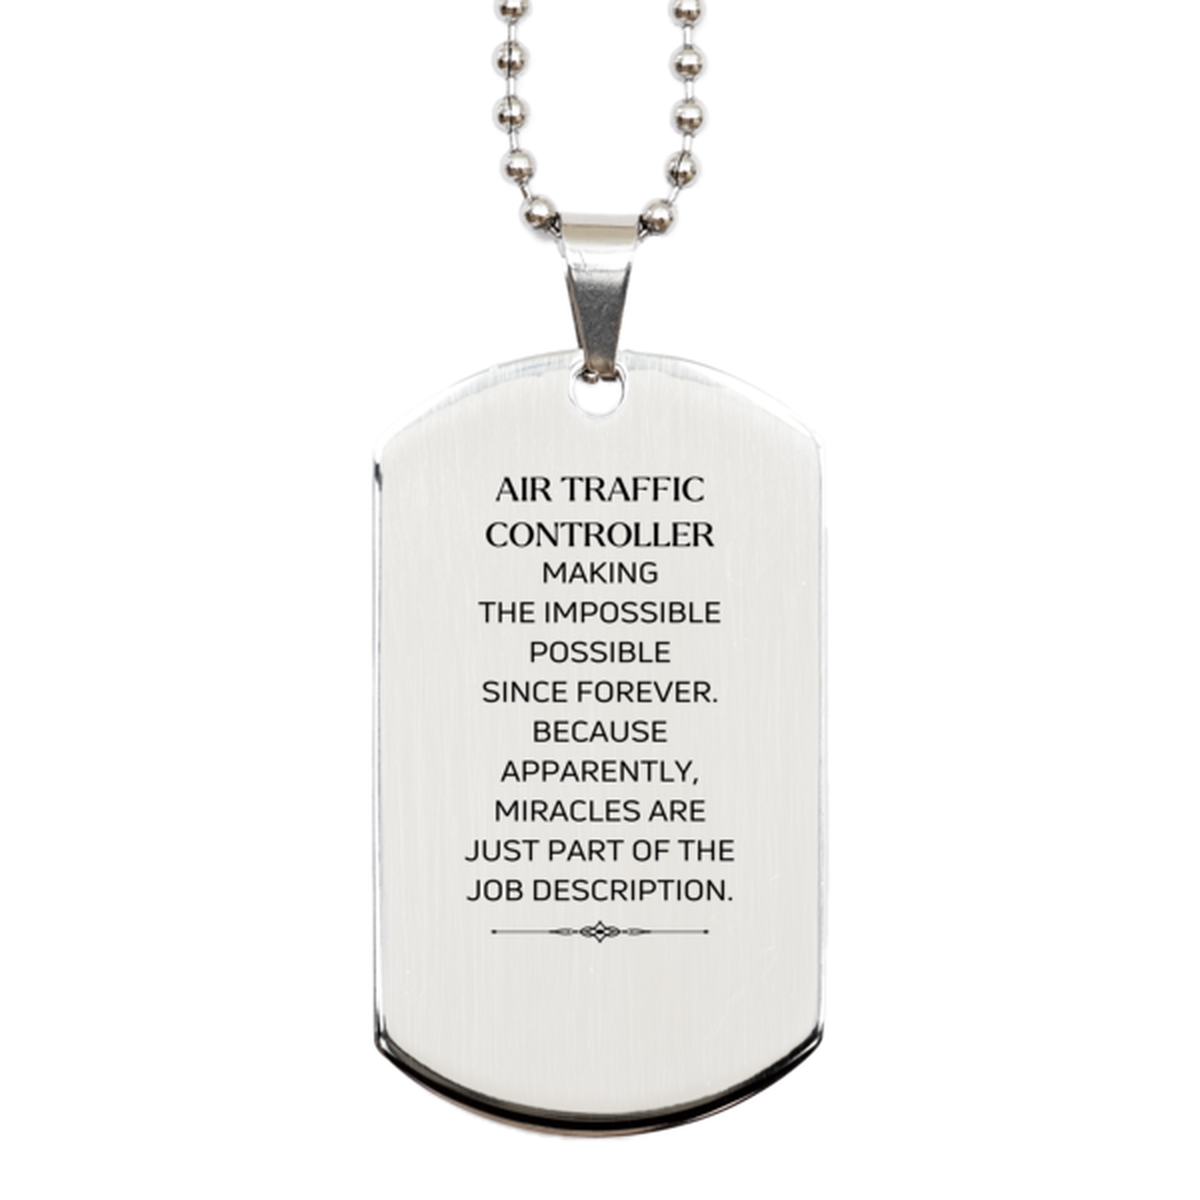 Funny Air Traffic Controller Gifts, Miracles are just part of the job description, Inspirational Birthday Silver Dog Tag For Air Traffic Controller, Men, Women, Coworkers, Friends, Boss